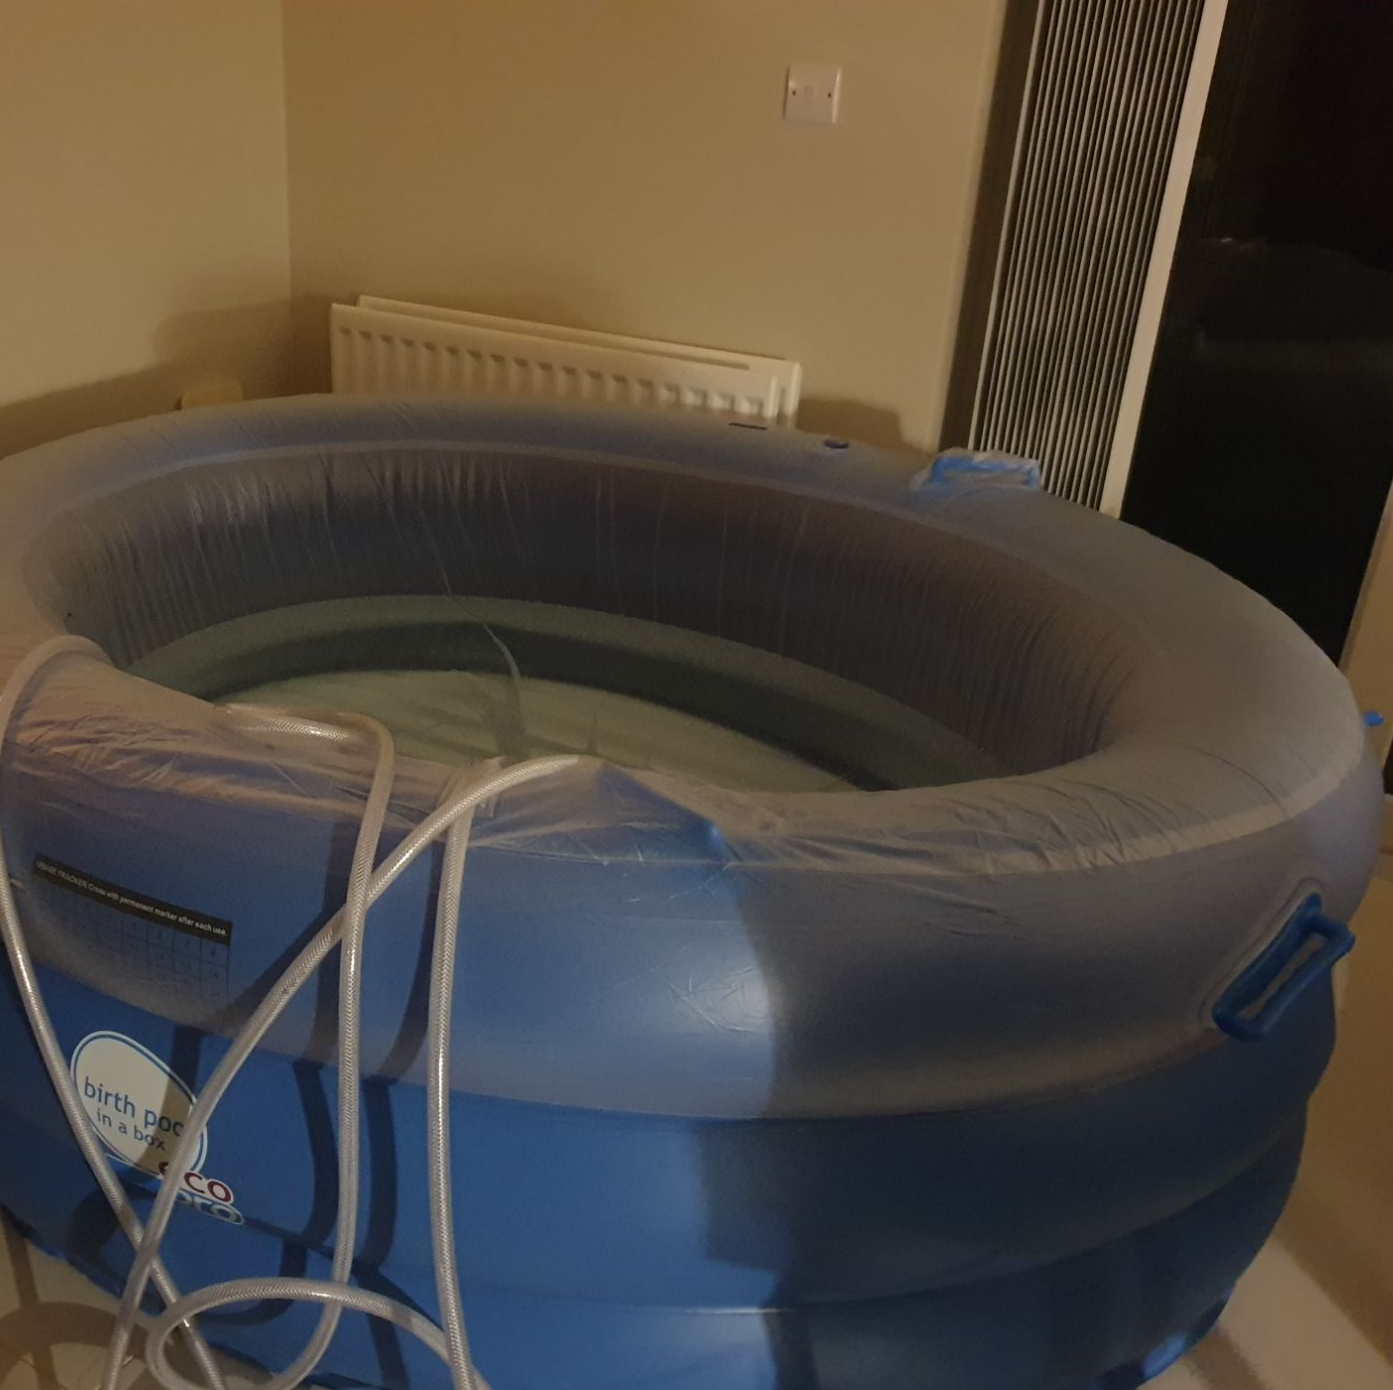 A filled birth pool, ready for use.